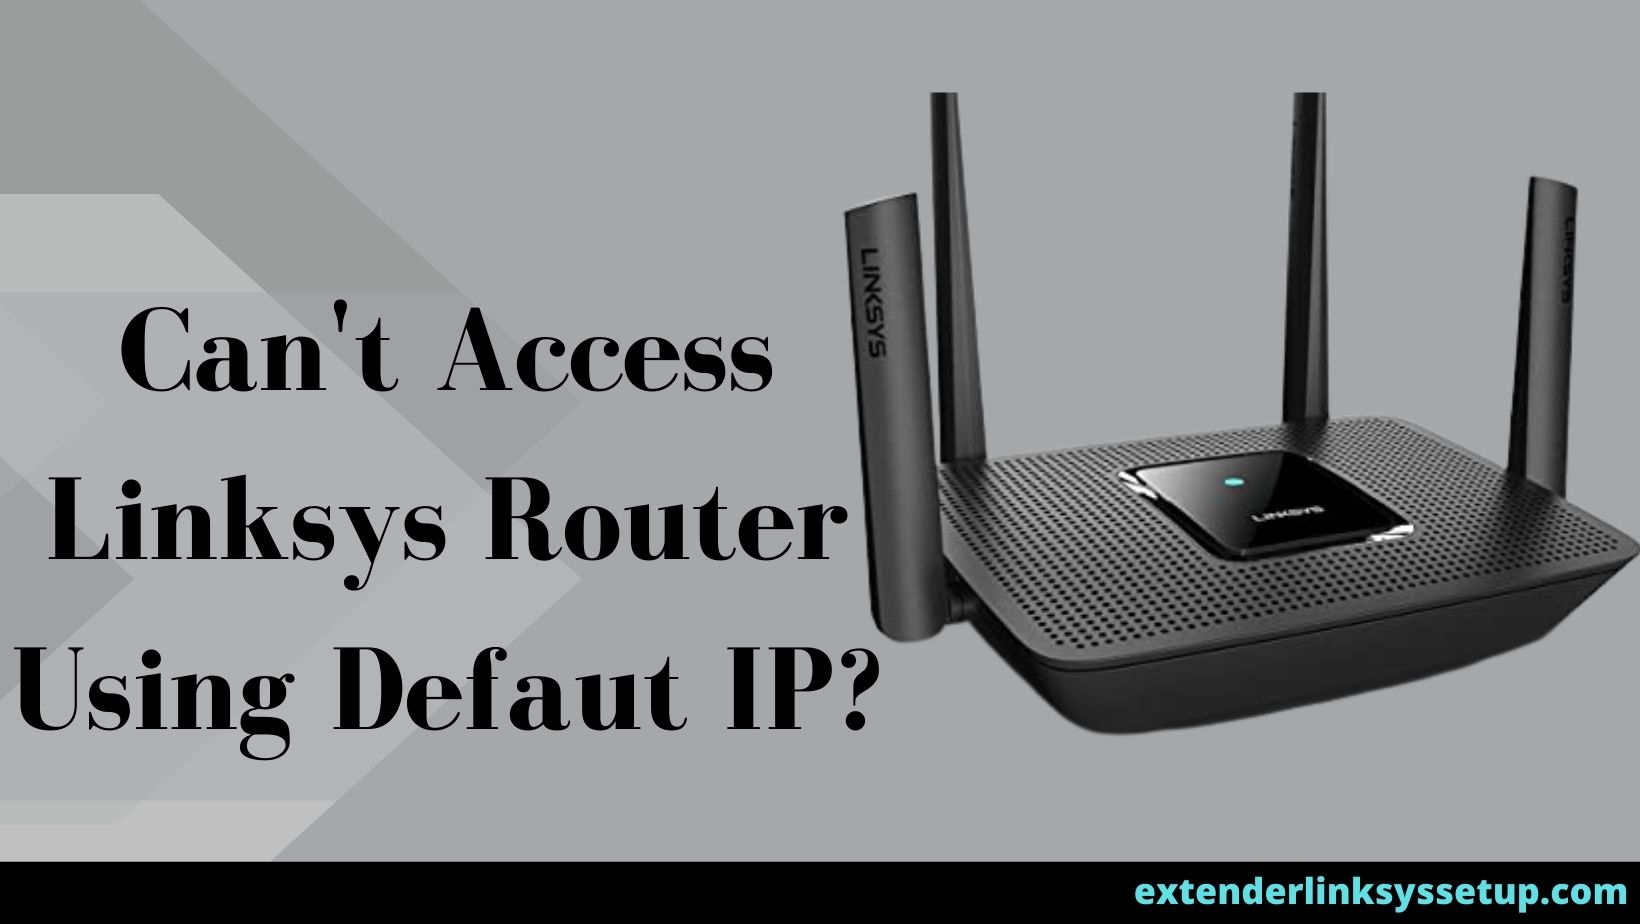 Can't Access Linksys Router Using Defaut IP?